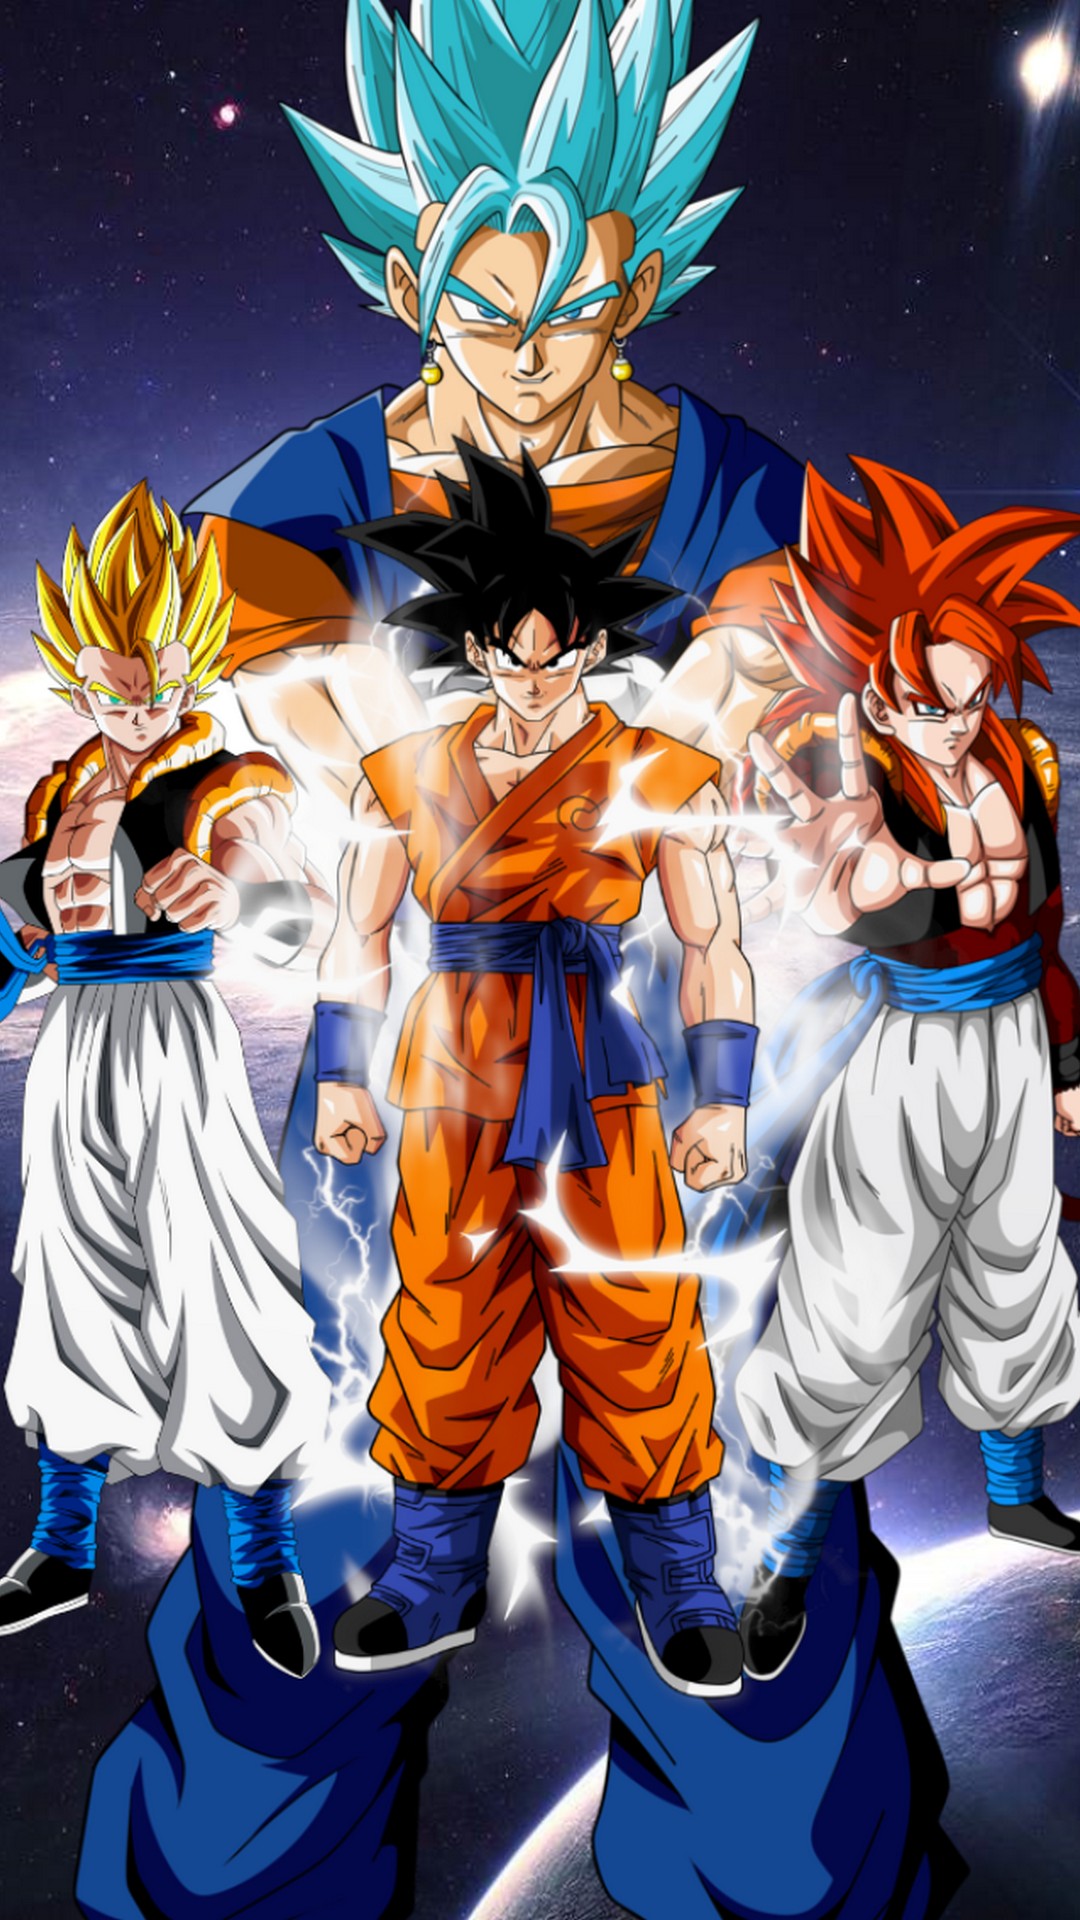 iPhone 7 Wallpaper Goku with image resolution 1080x1920 pixel. You can make this wallpaper for your iPhone 5, 6, 7, 8, X backgrounds, Mobile Screensaver, or iPad Lock Screen